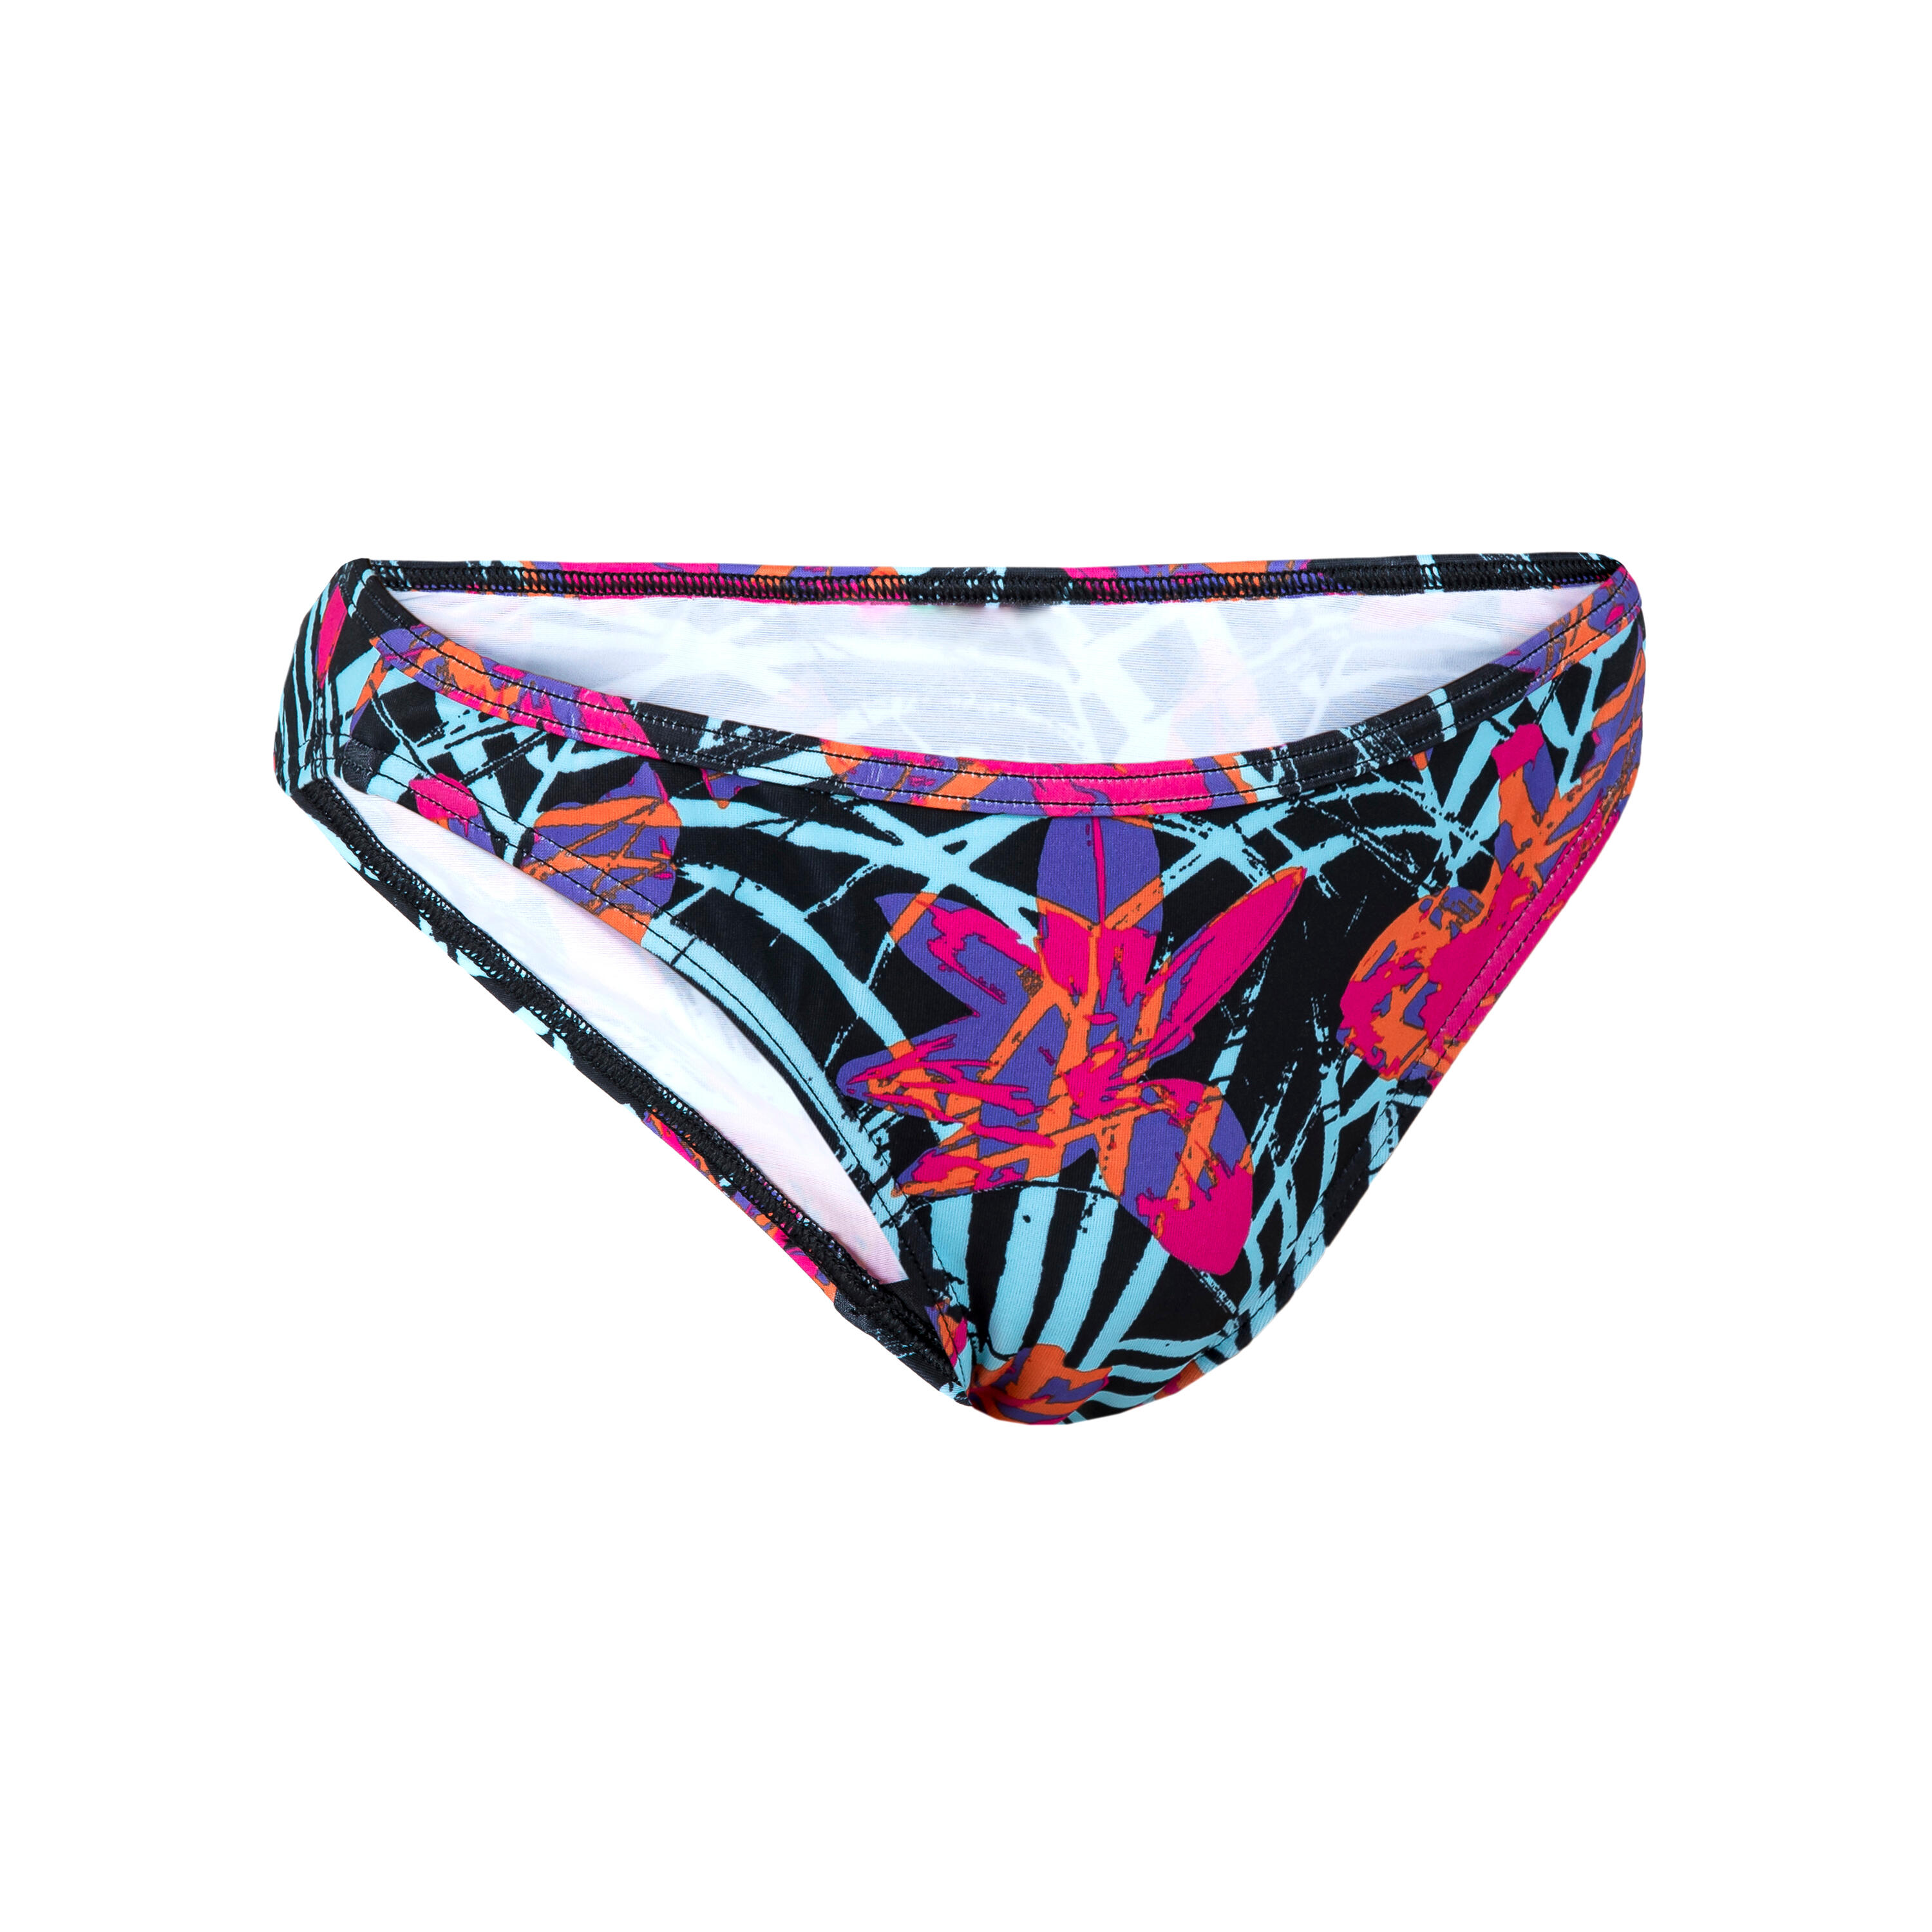 Girl's swimsuit bottoms - 100 Zeli tropical party pink 1/5